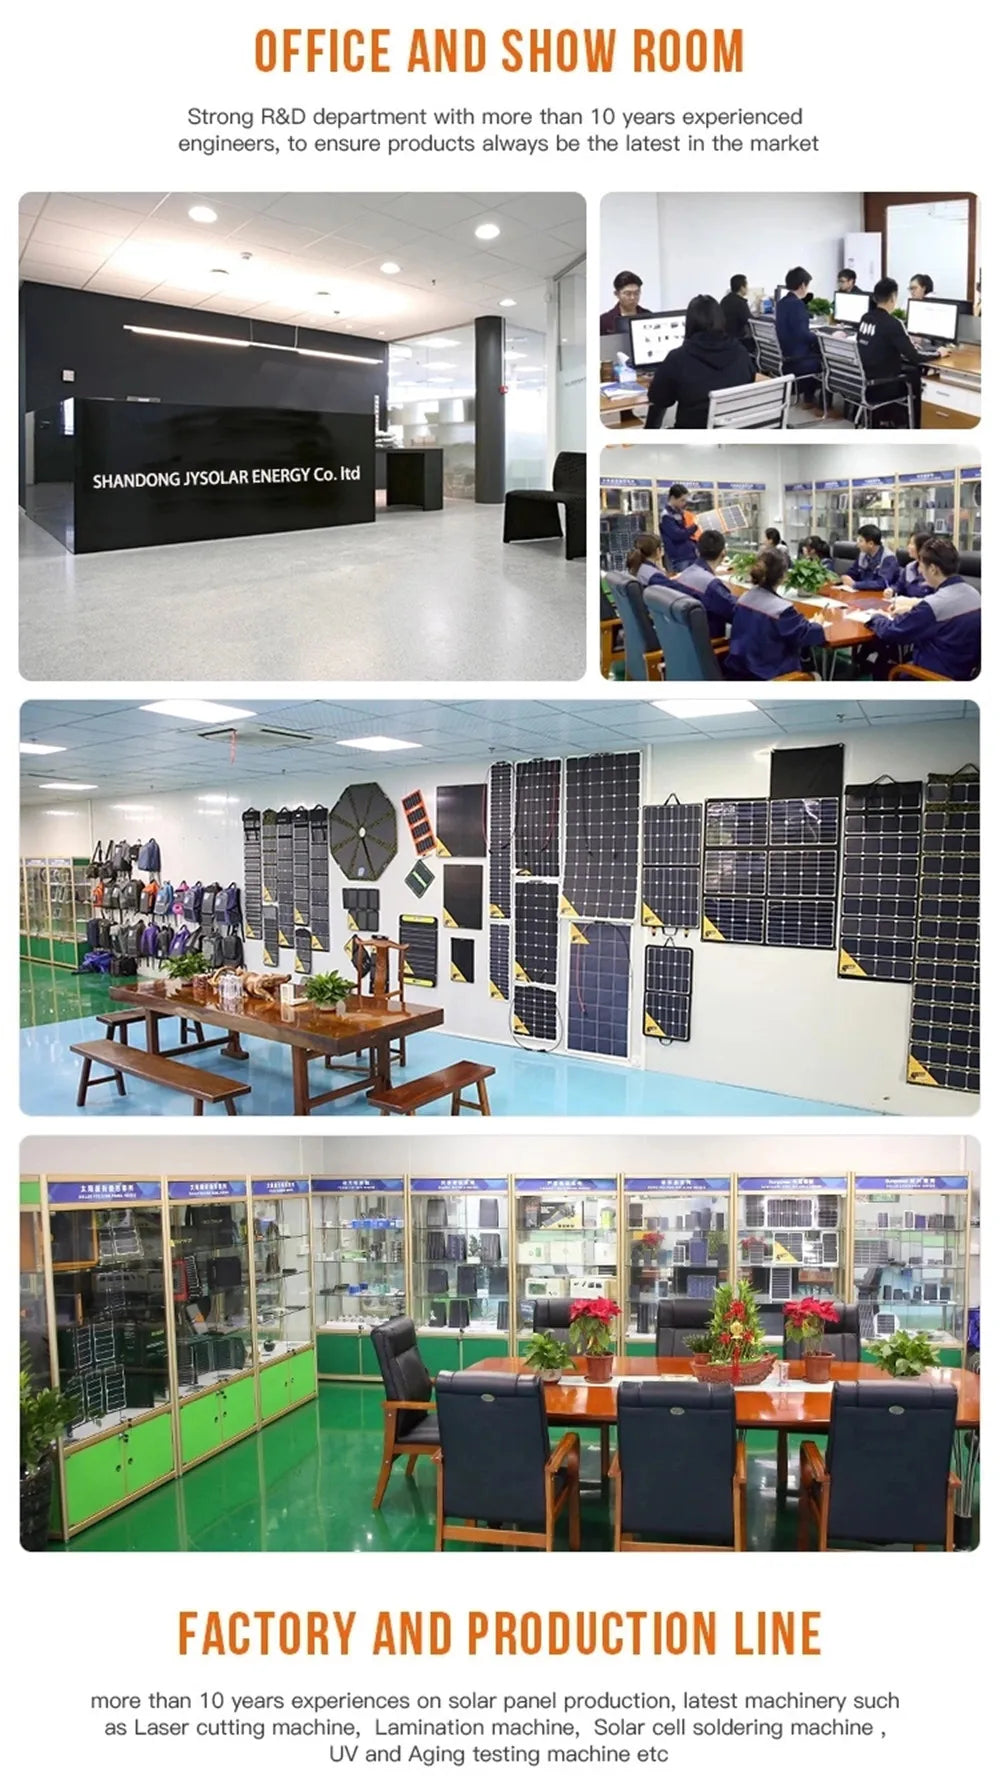 400W 300W 200W 100W Etfe Flexible Solar Panel, Shandong JySolar: R&D leader with 10+ years experience, producing high-quality solar panels with state-of-the-art machinery.